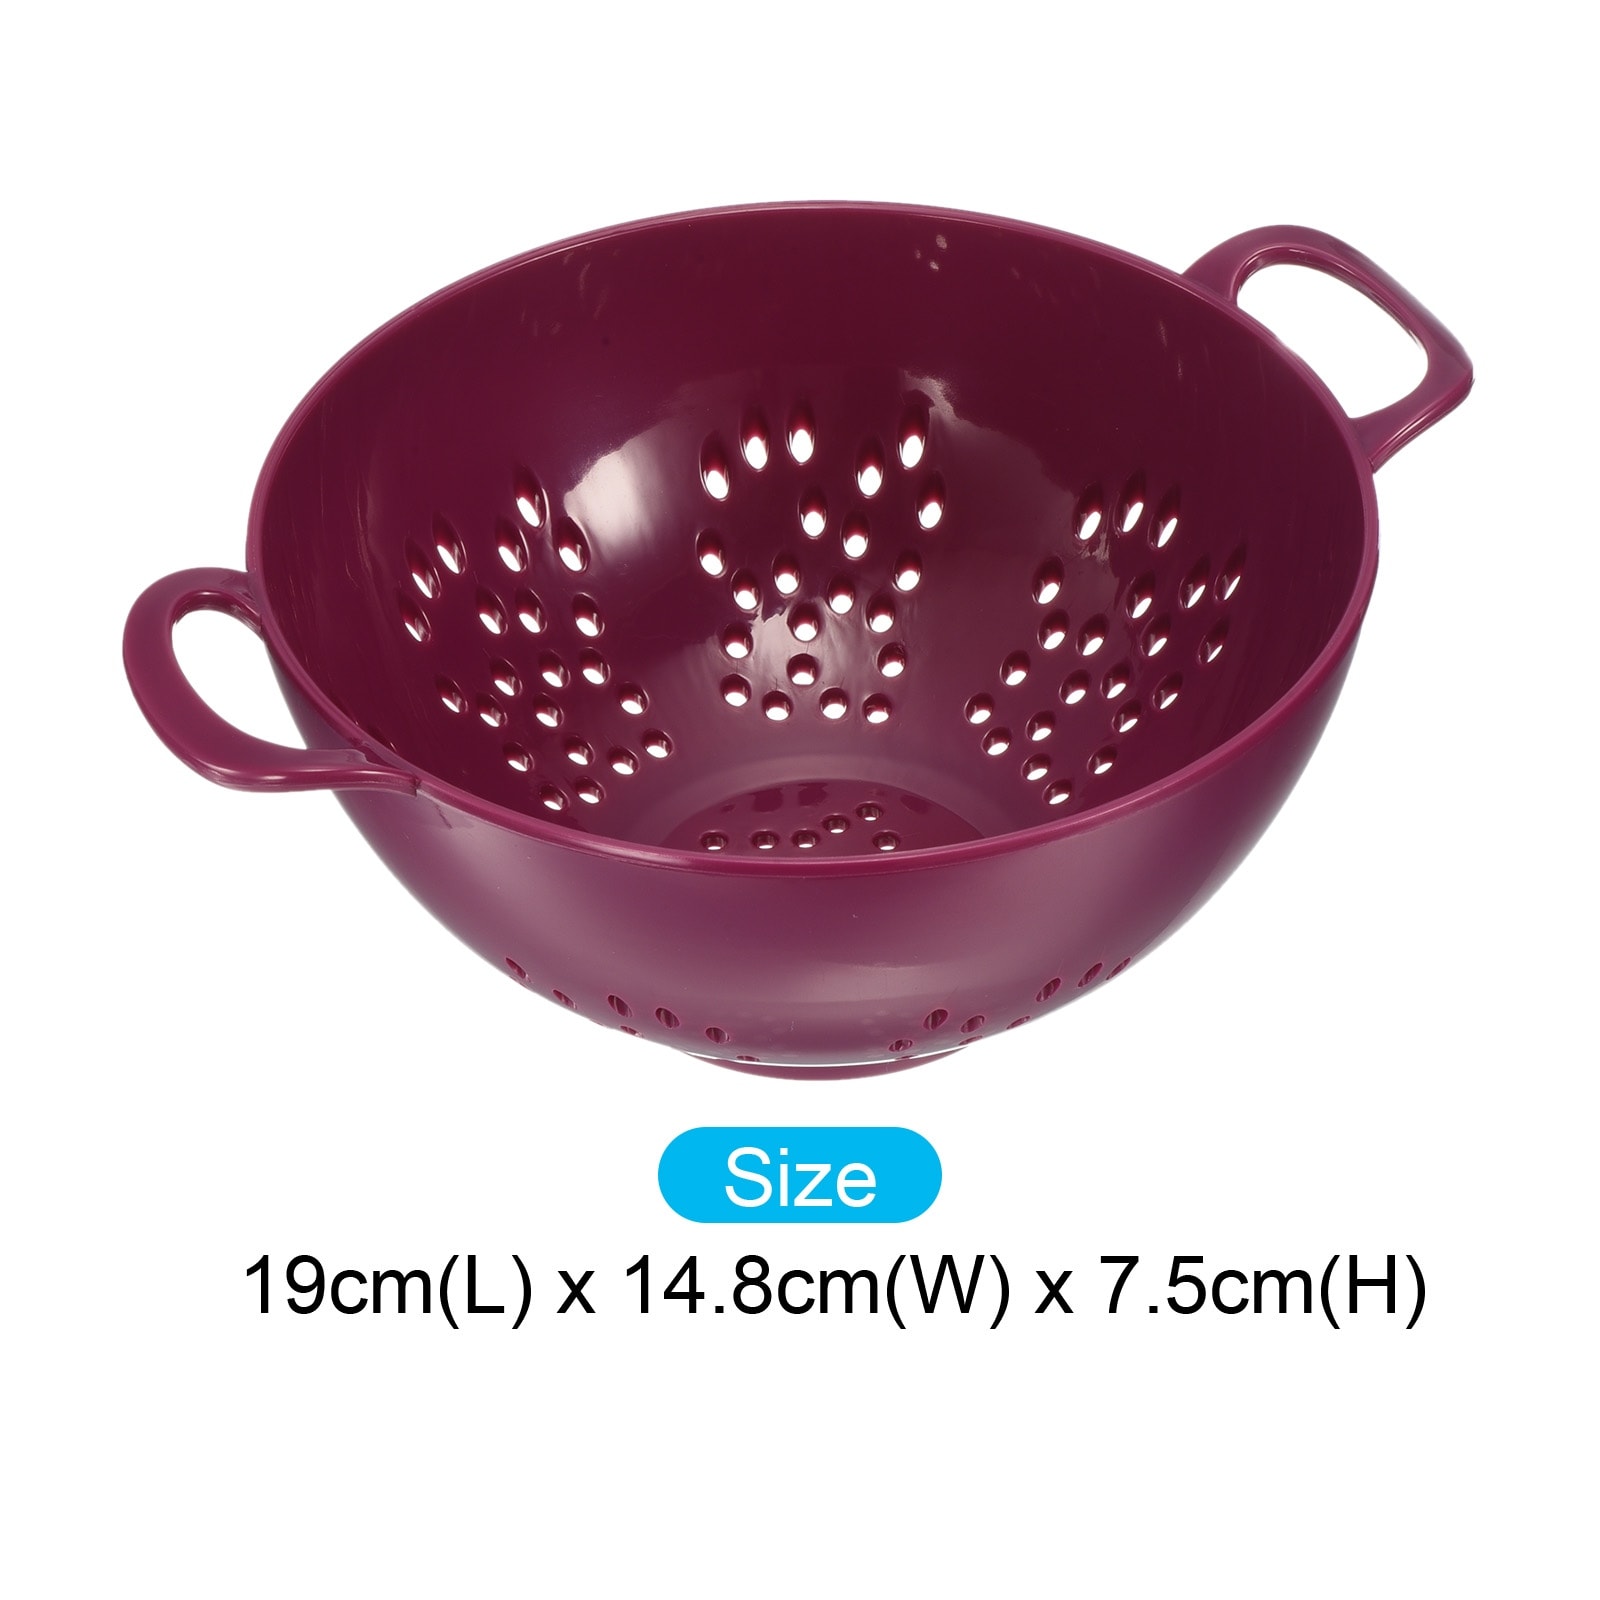 https://ak1.ostkcdn.com/images/products/is/images/direct/b5d26f7ea4e86741e681c00065ca7b51b2d9ad2e/Rice-Sieve-Washing-Colander-Strainer-Drainer-Fruit-Cleaning-Bowl-Purple.jpg